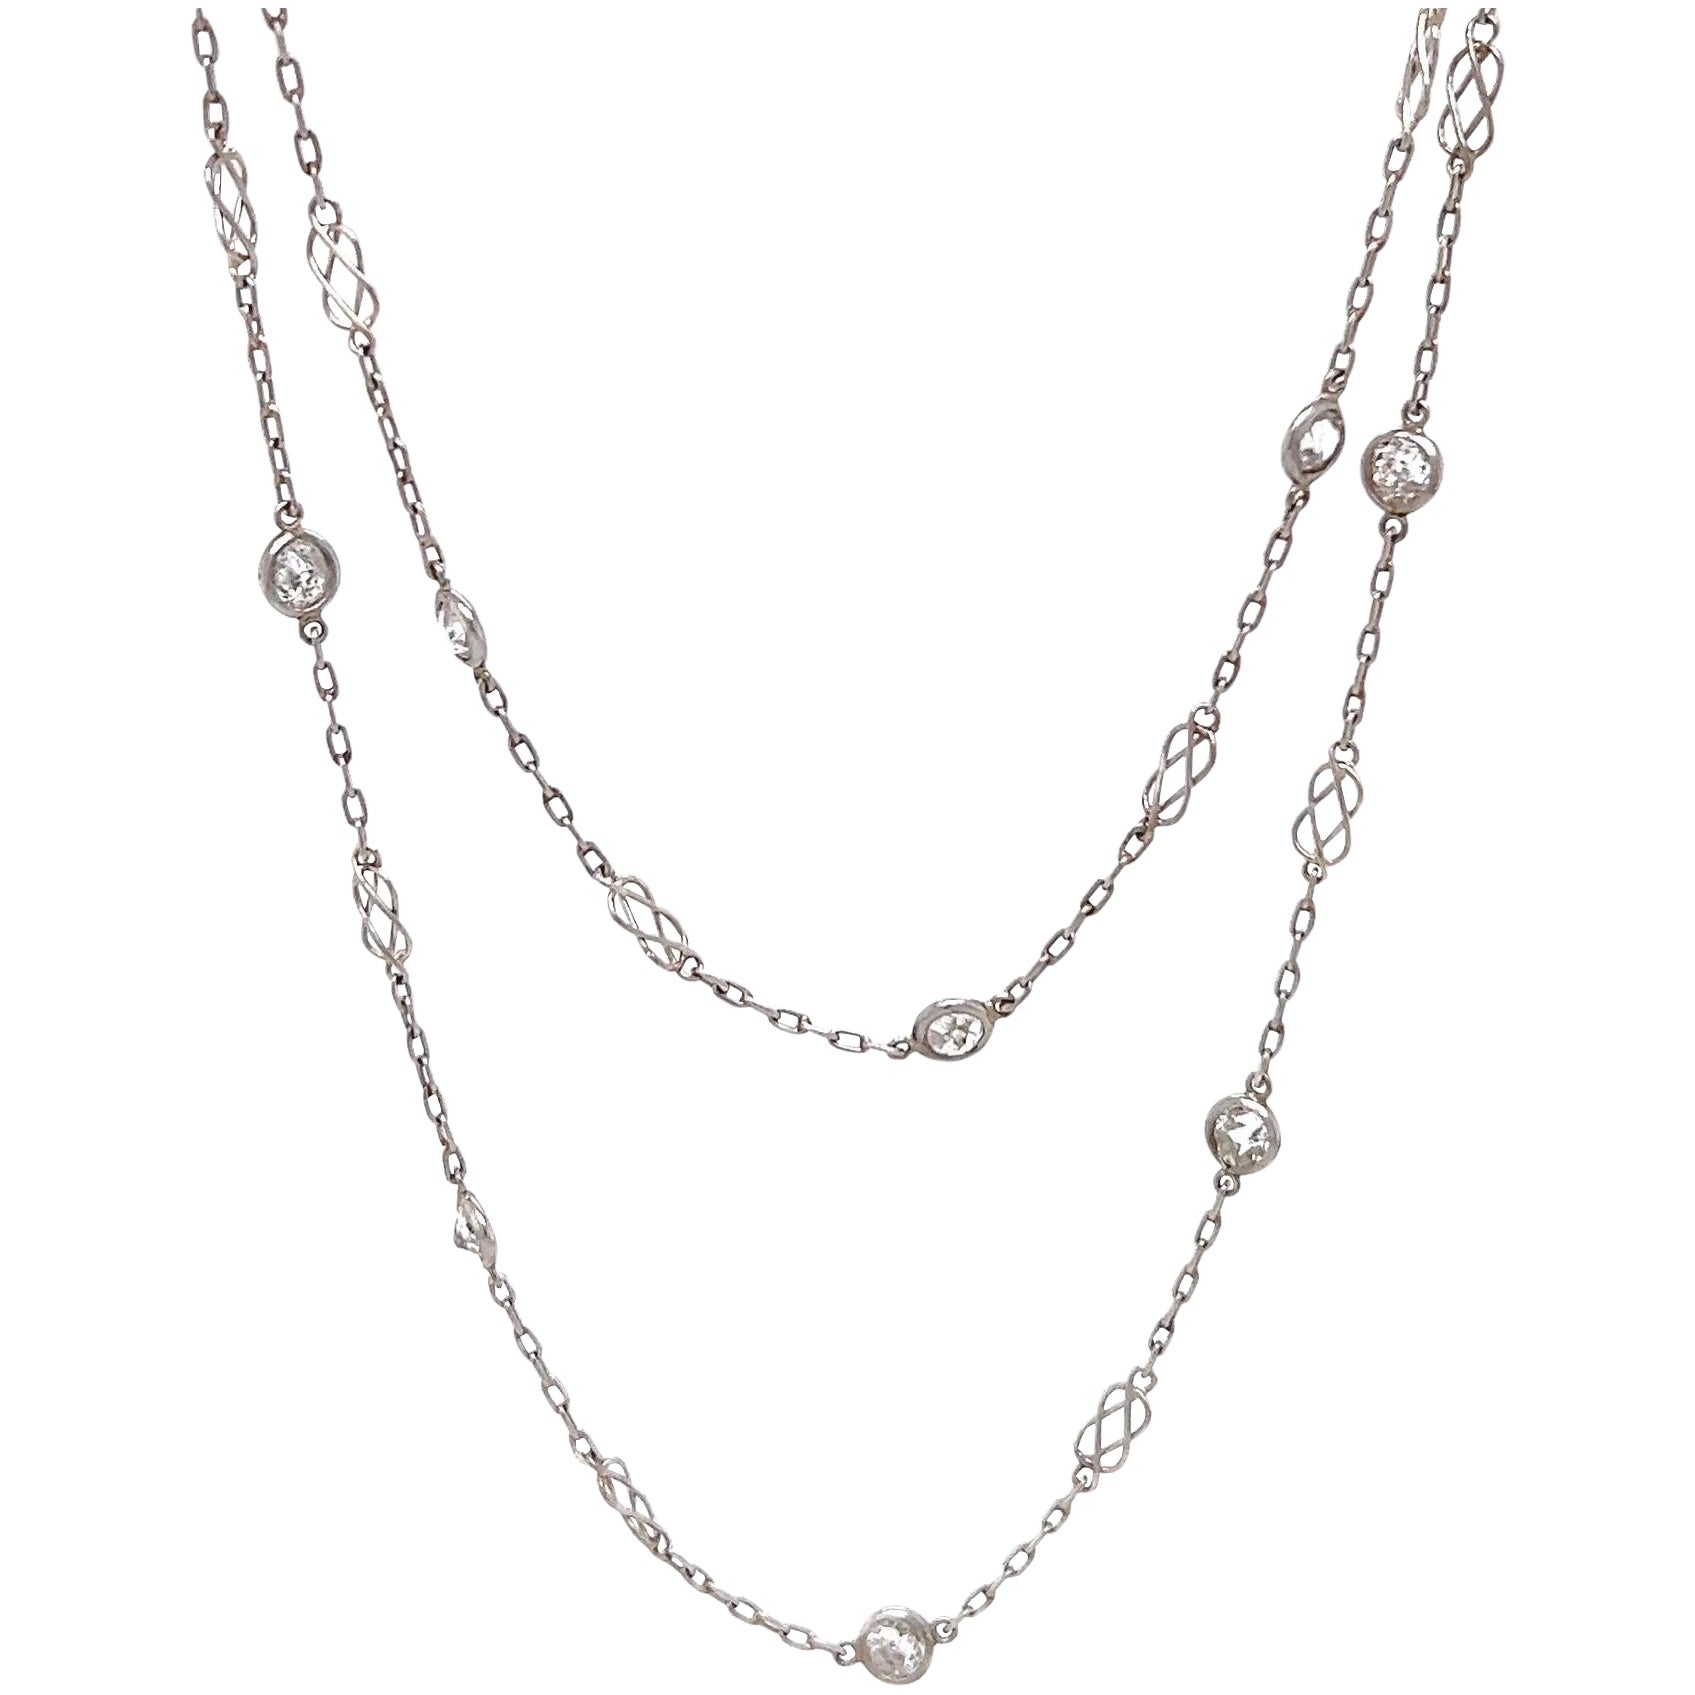 4.89 Carats Old European Cut Diamonds by the Yard Platinum Necklace